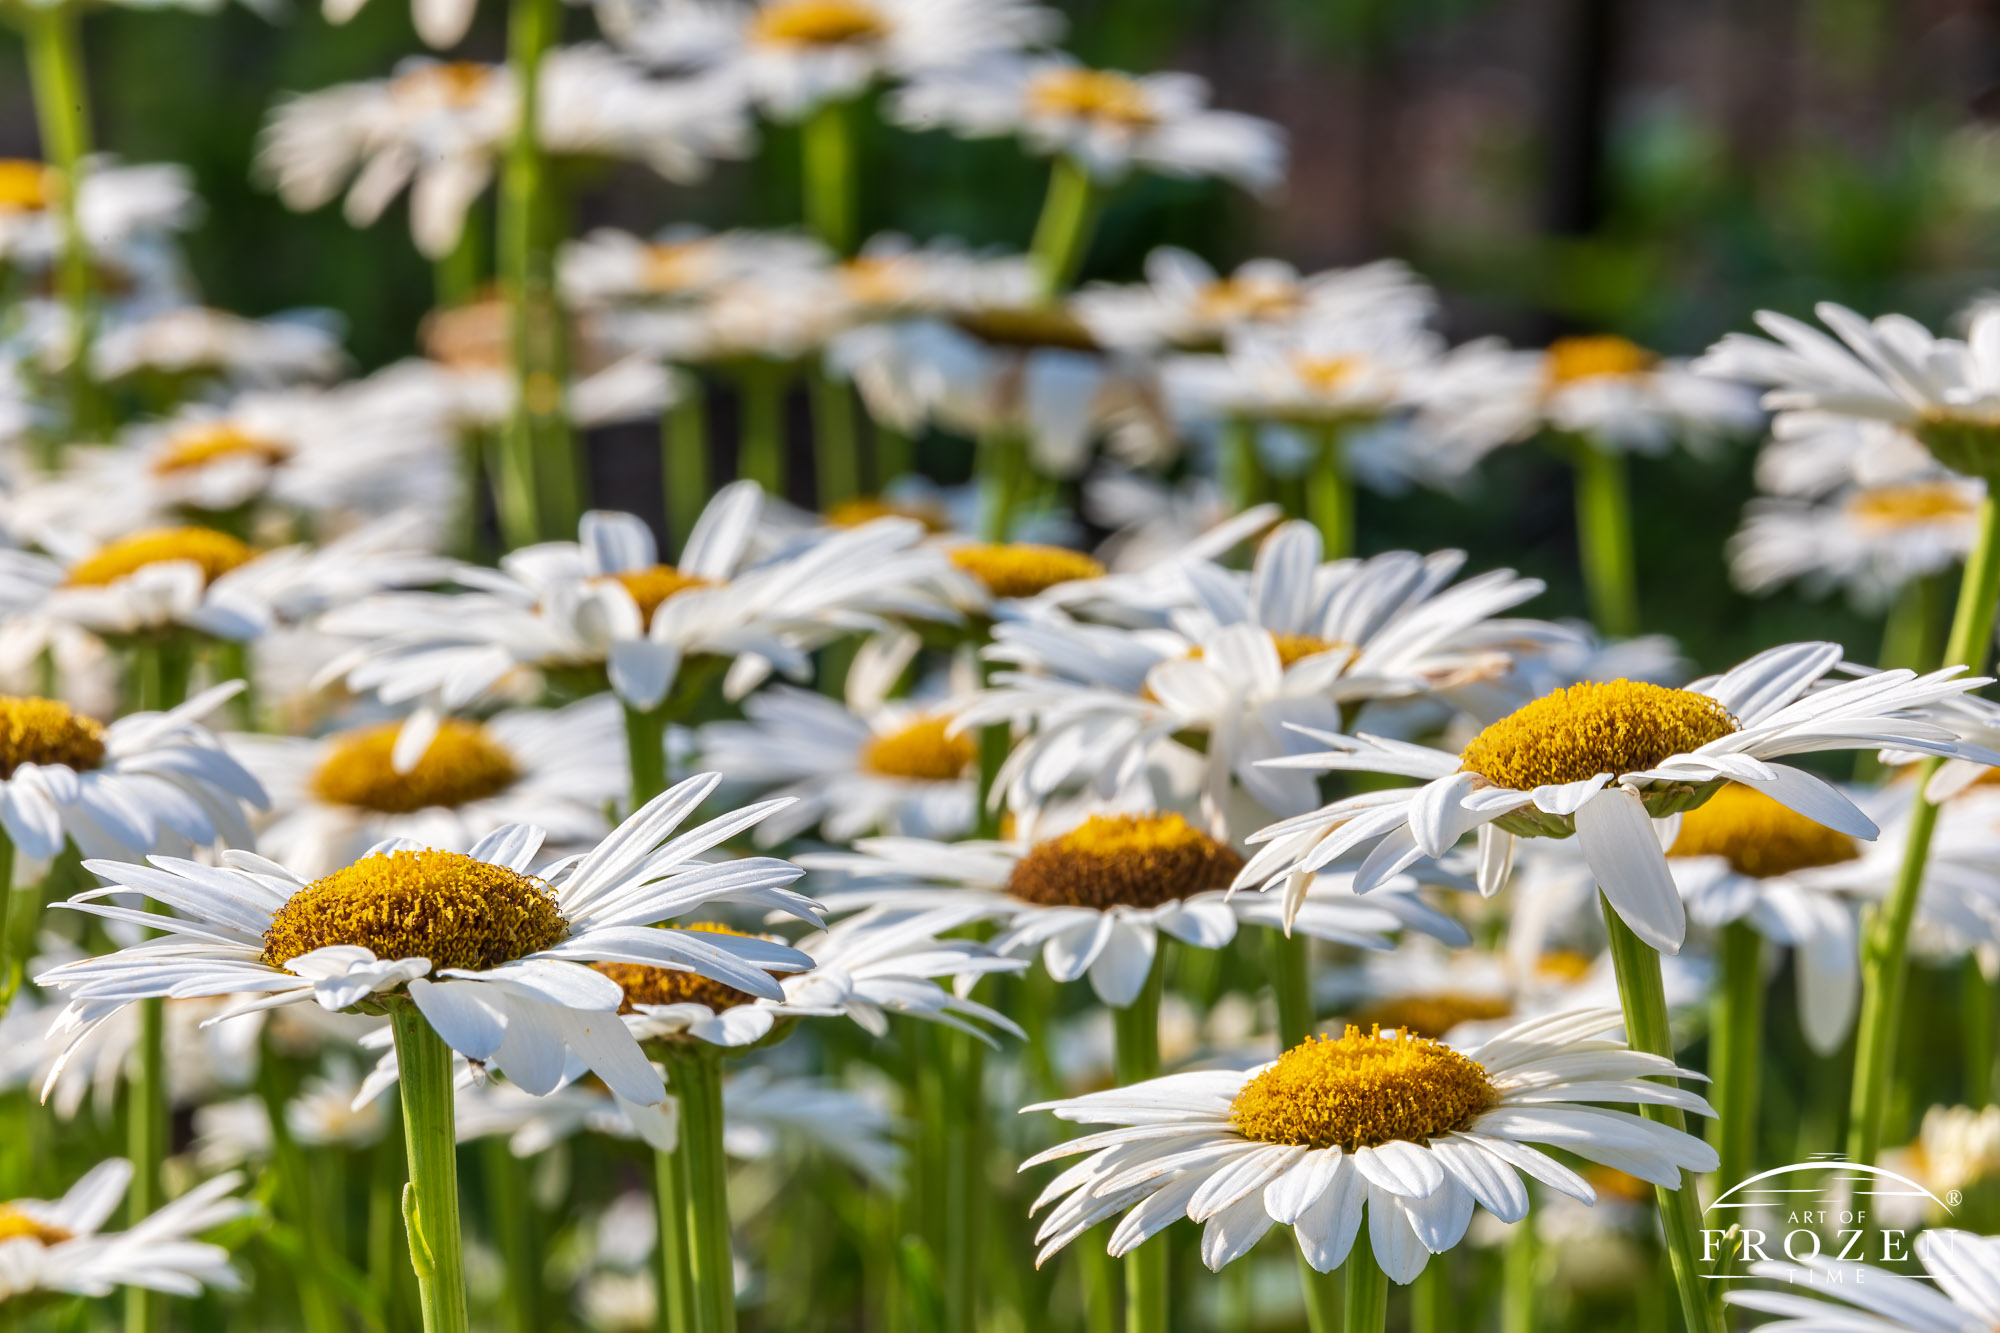 Close view of an Ox-eye Daisy featuring its many white petals and yellow sunflower-like center